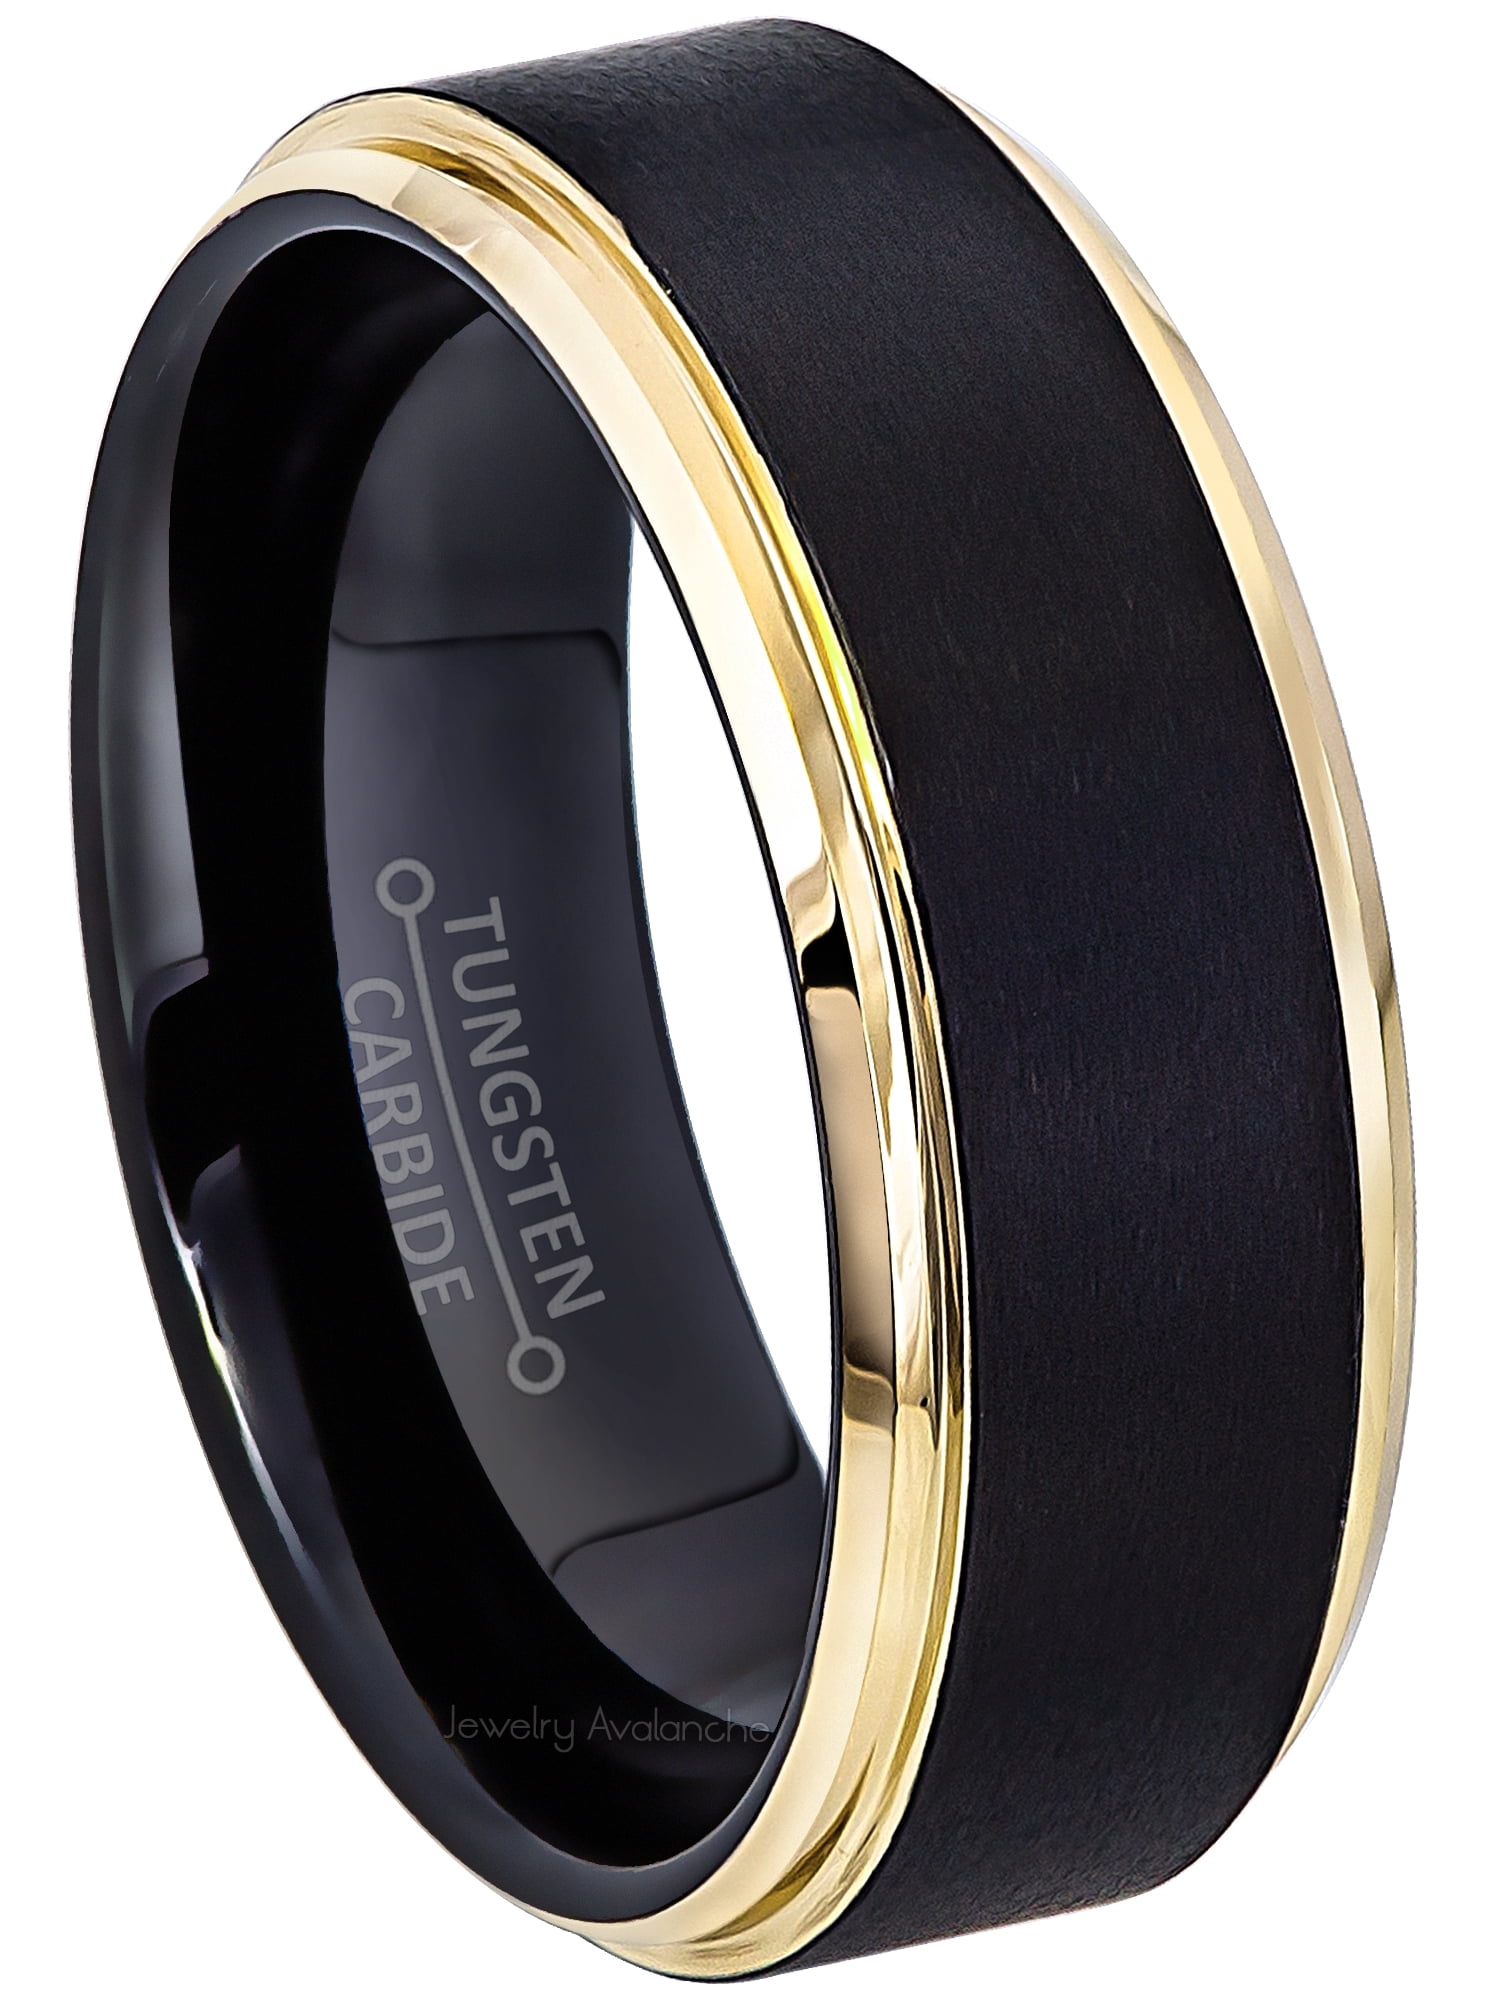 Men's Tungsten Carbide Ring Wedding Band Comfort Fit Rings with Matte Stripes 